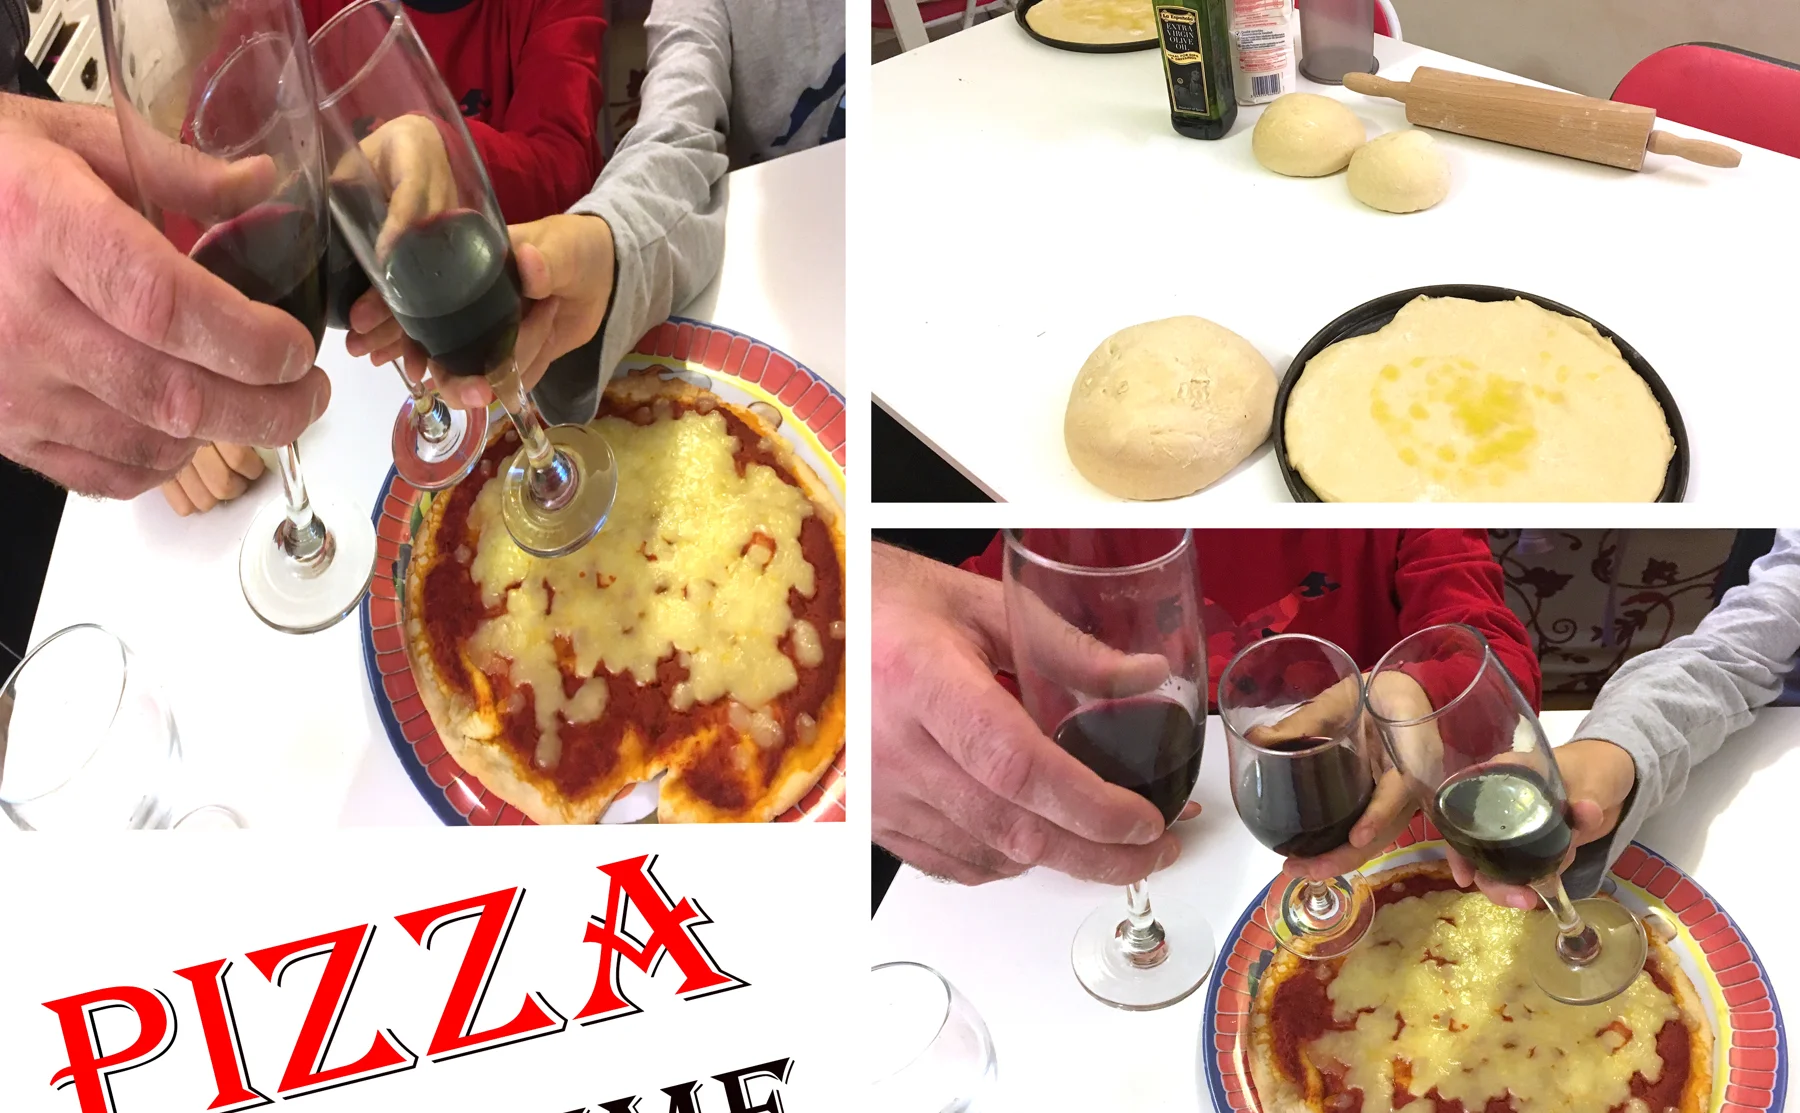 Paris pizza cooking class and dinner with an Italian family - 1335077